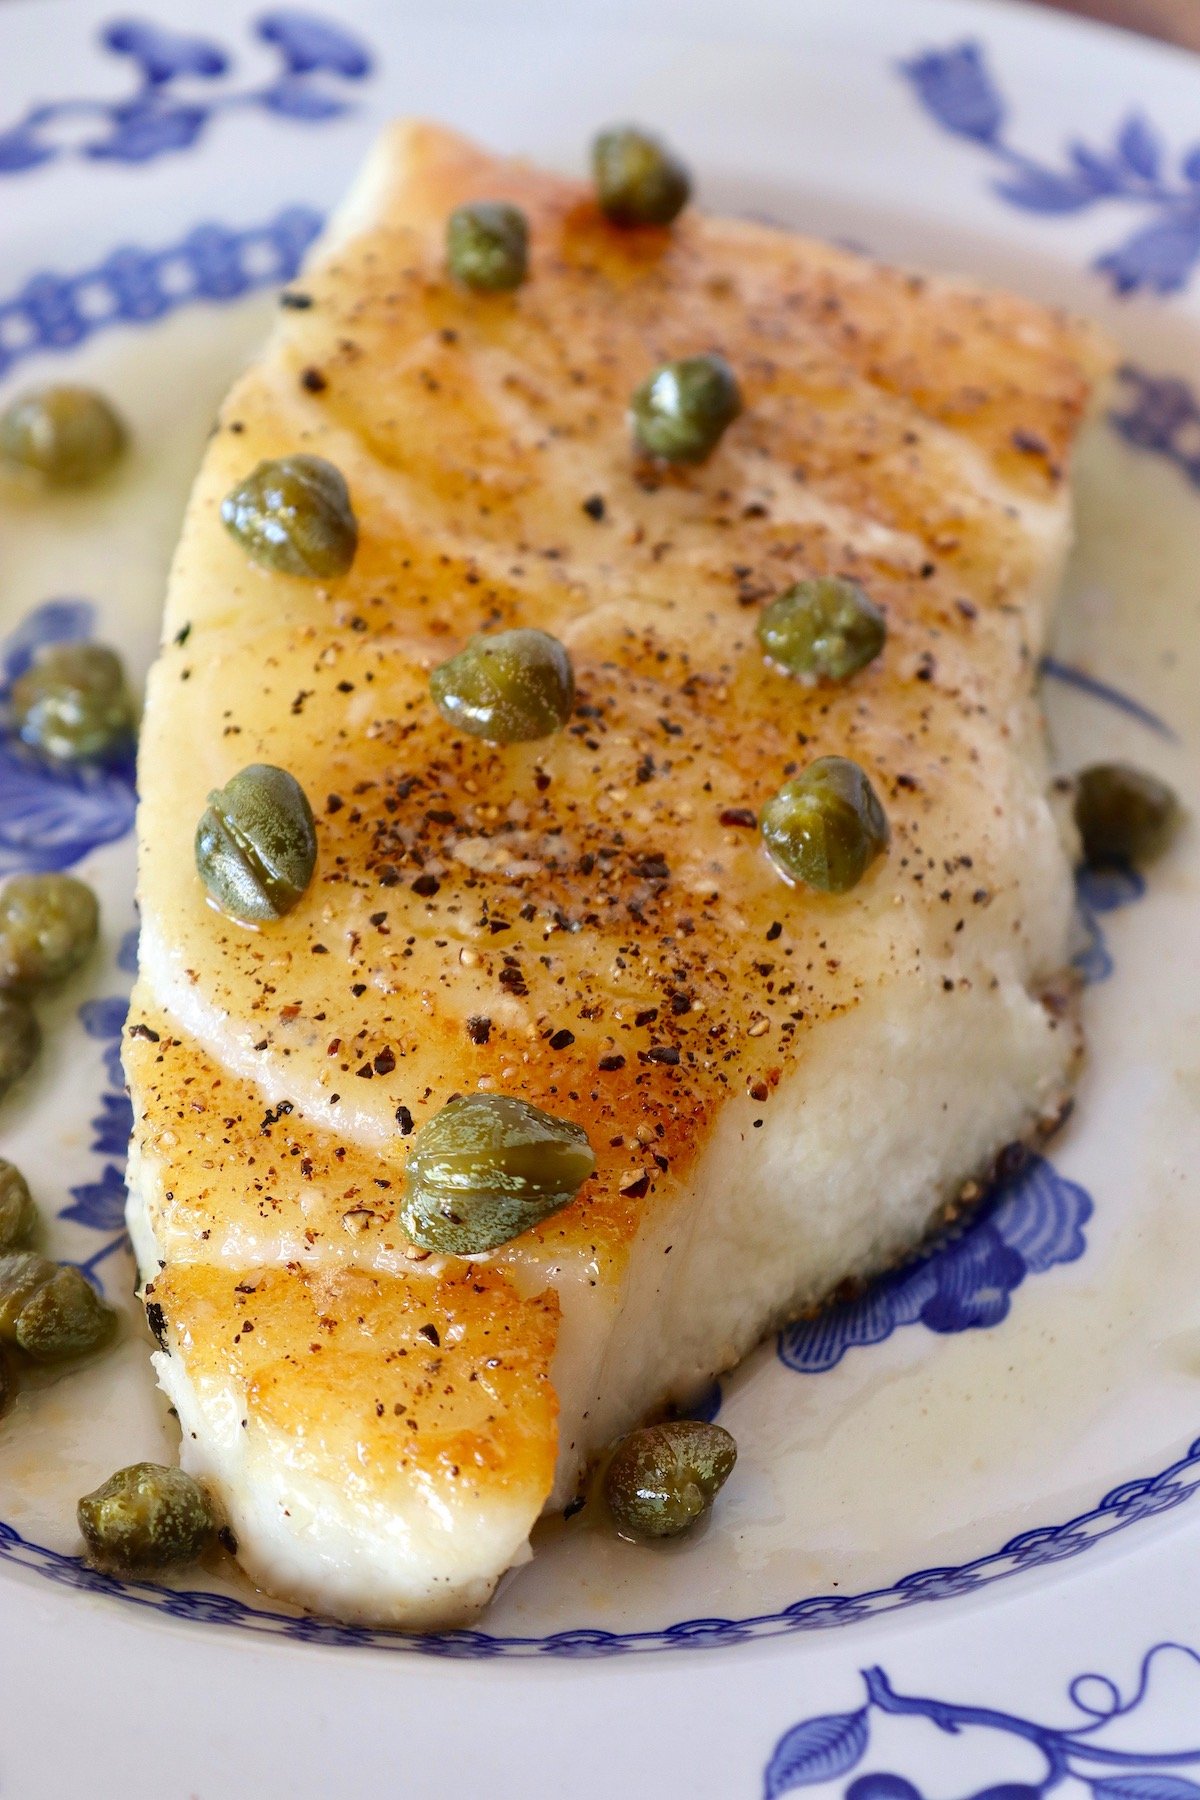 One fillet of golden pan-seared sea bass with capers on top, on blue and white china.